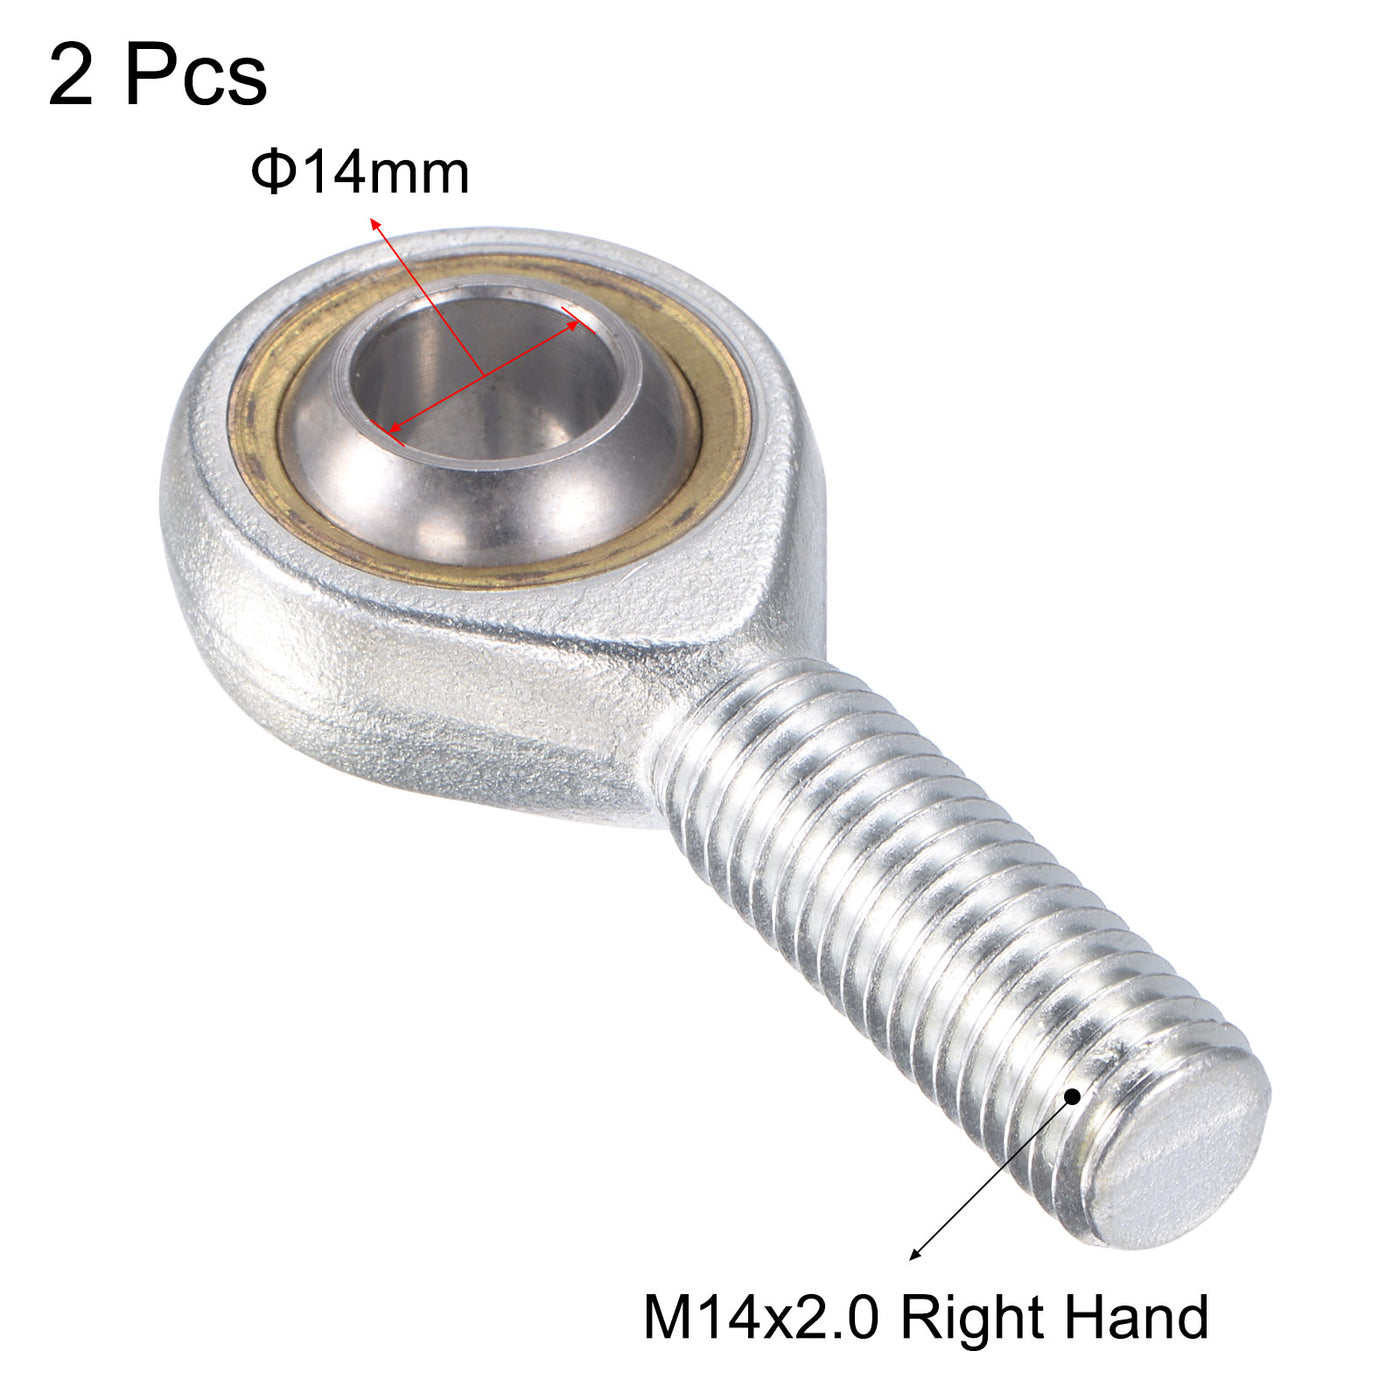 uxcell Uxcell 2pcs SA14TK POSA14 Rod End Bearing 14mm Bore M14x2.0 Right Hand Male Thread